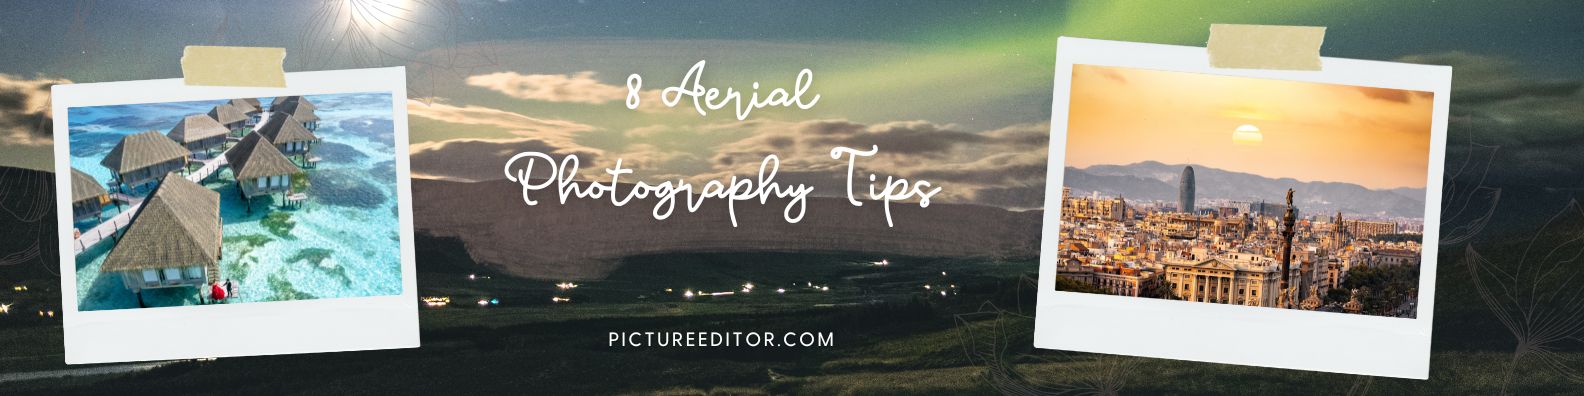 8 Aerial Photography Tips